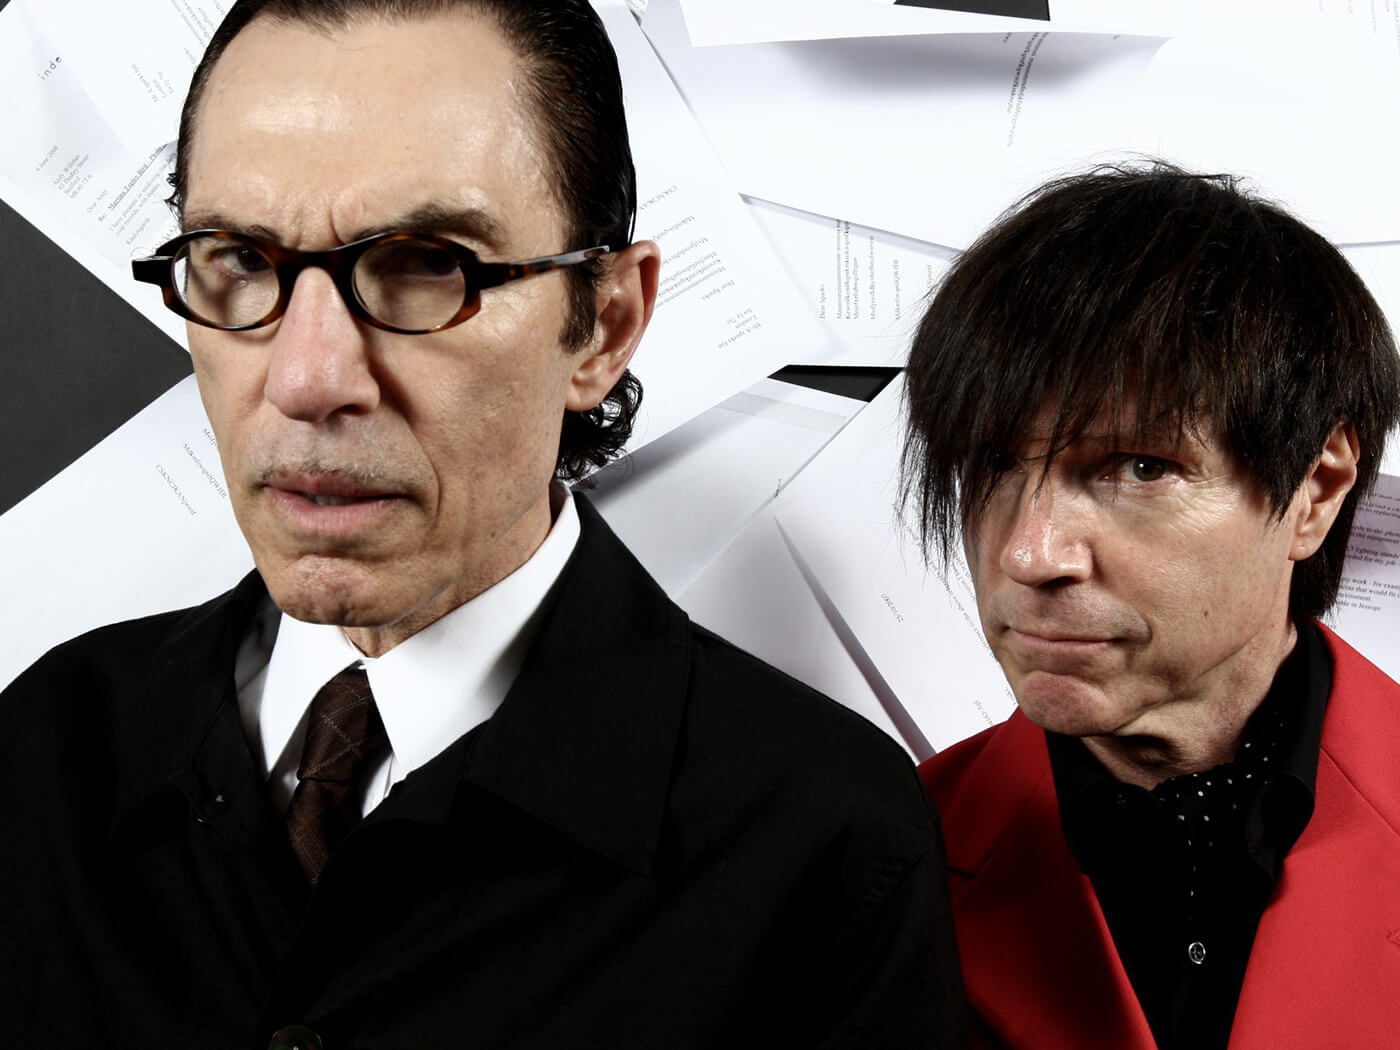 A new movie musical written by Sparks duo Ron and Russell Mael is in the works